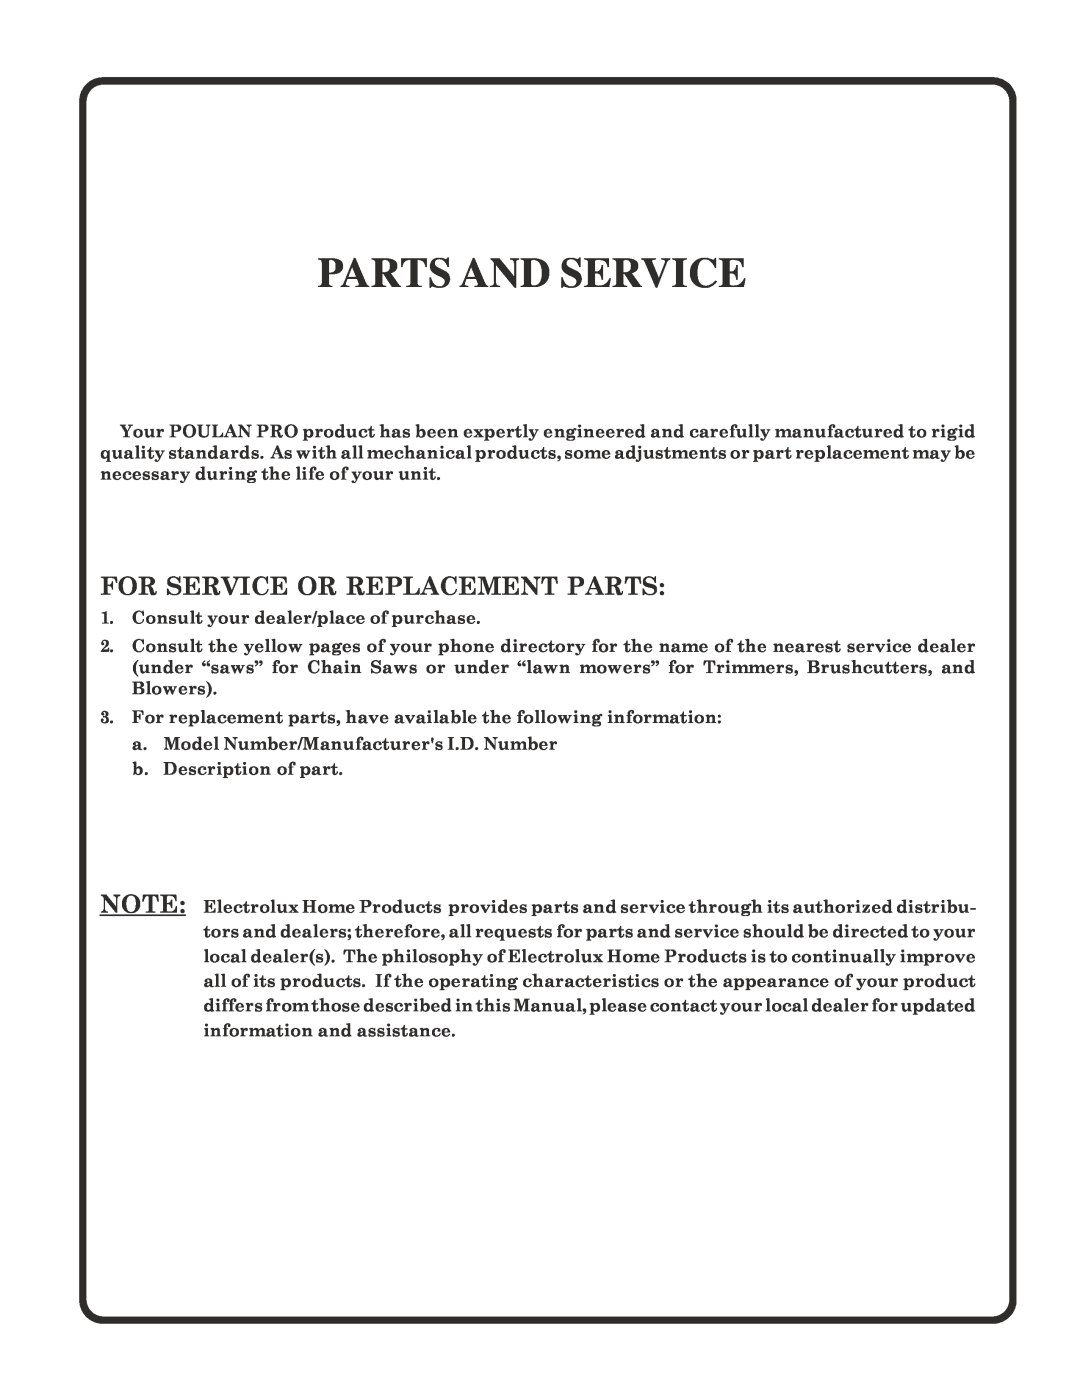 Poulan 183748 owner manual Parts And Service, For Service Or Replacement Parts 